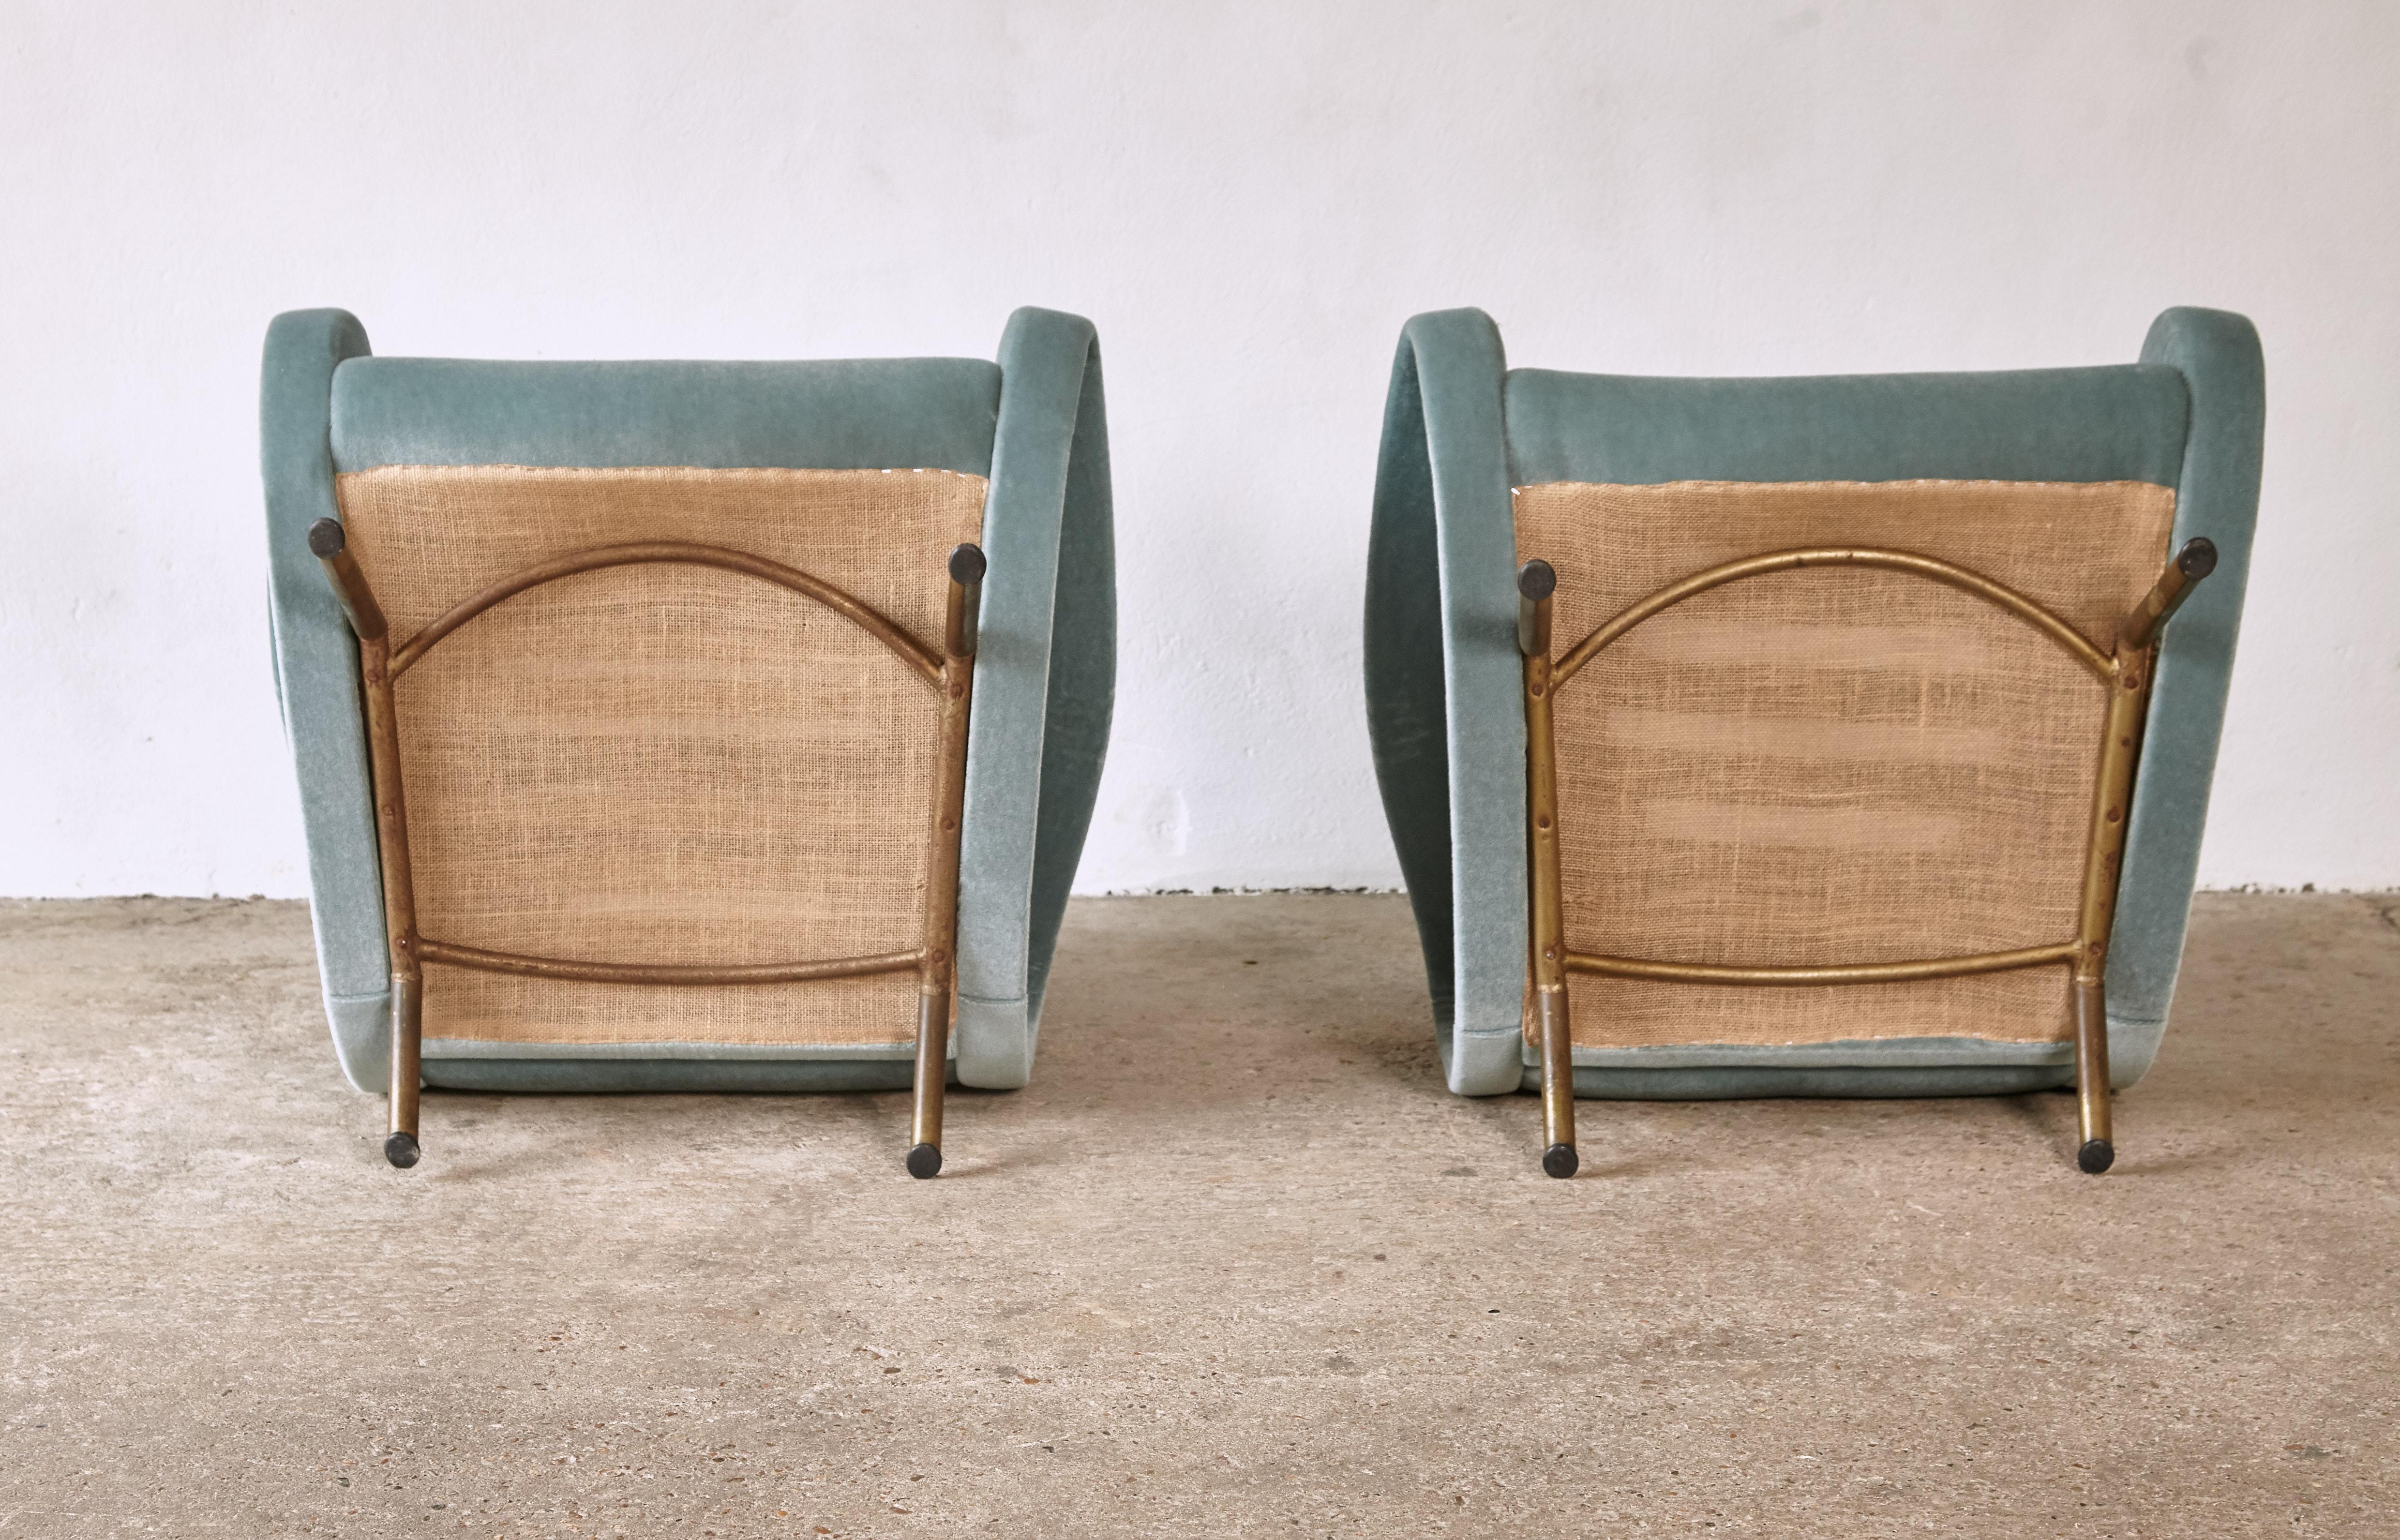 Authentic Marco Zanuso Lady Chairs, 1950s, Newly Reupholstered in Pure Mohair 9